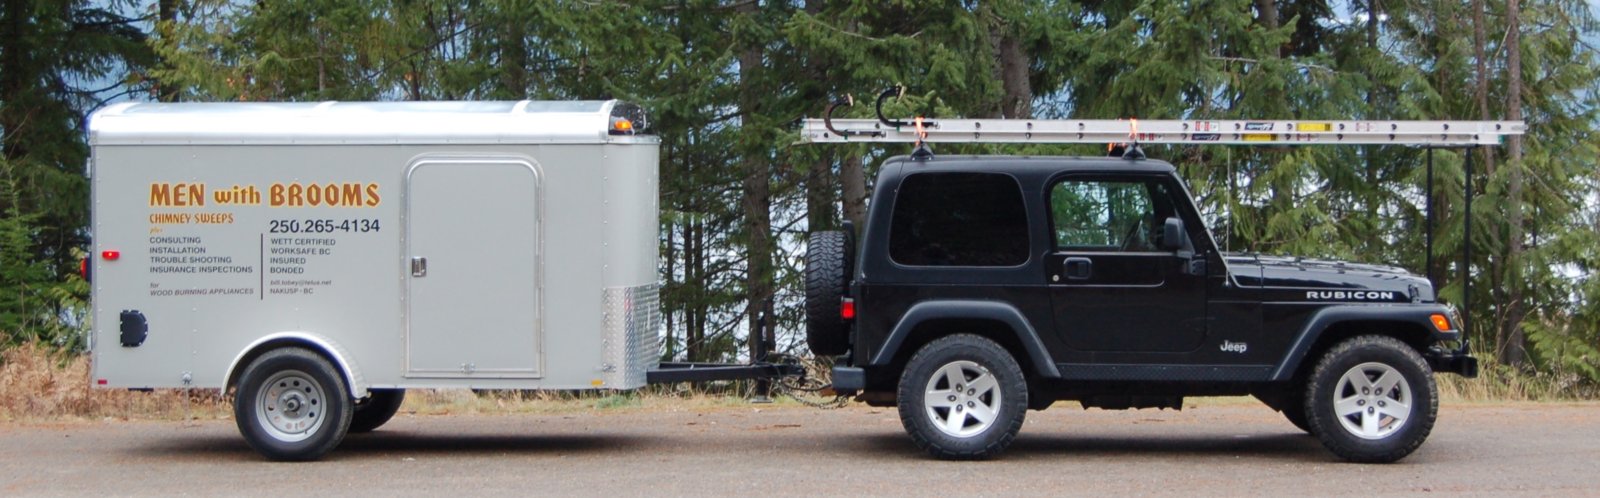 Towing a closed-in trailer | Jeep Wrangler TJ Forum